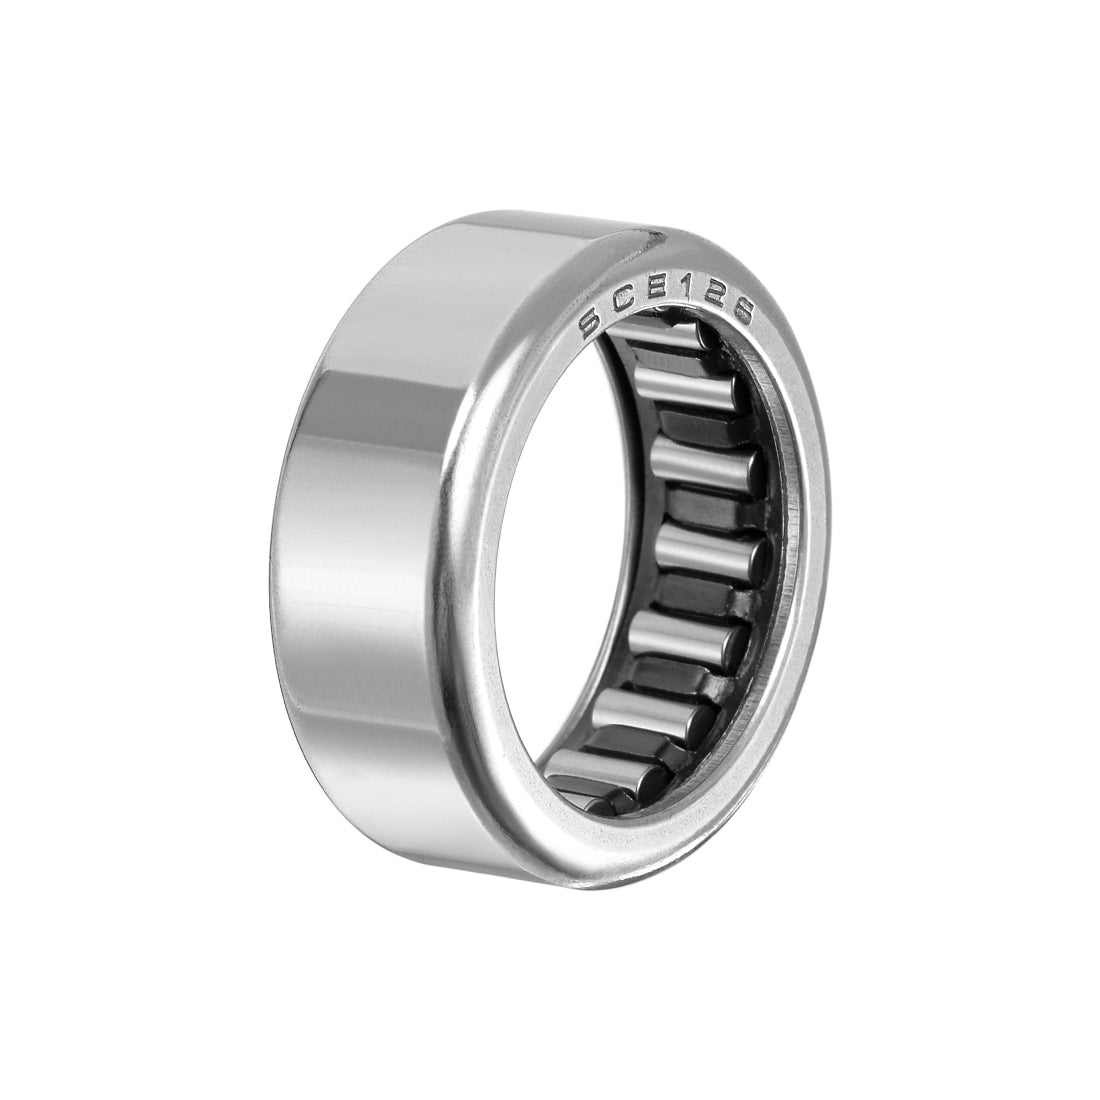 uxcell Uxcell Needle Roller Bearings, Open End, Stamping Steel Drawn Cup, Inch